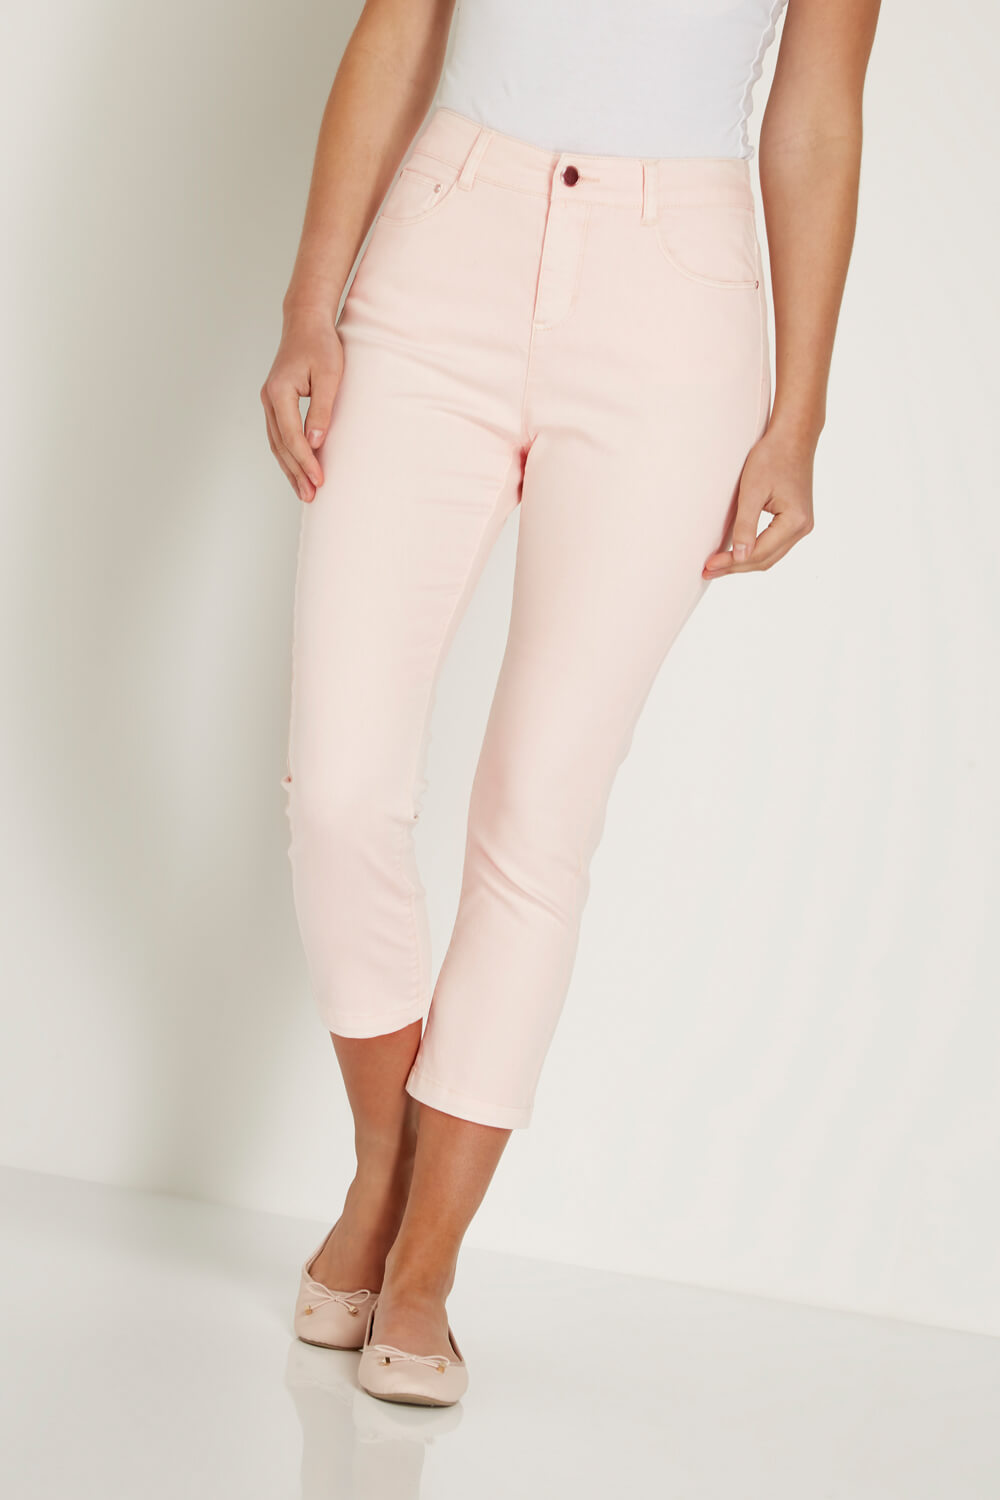 Light-Pink Cropped Jean, Image 2 of 5